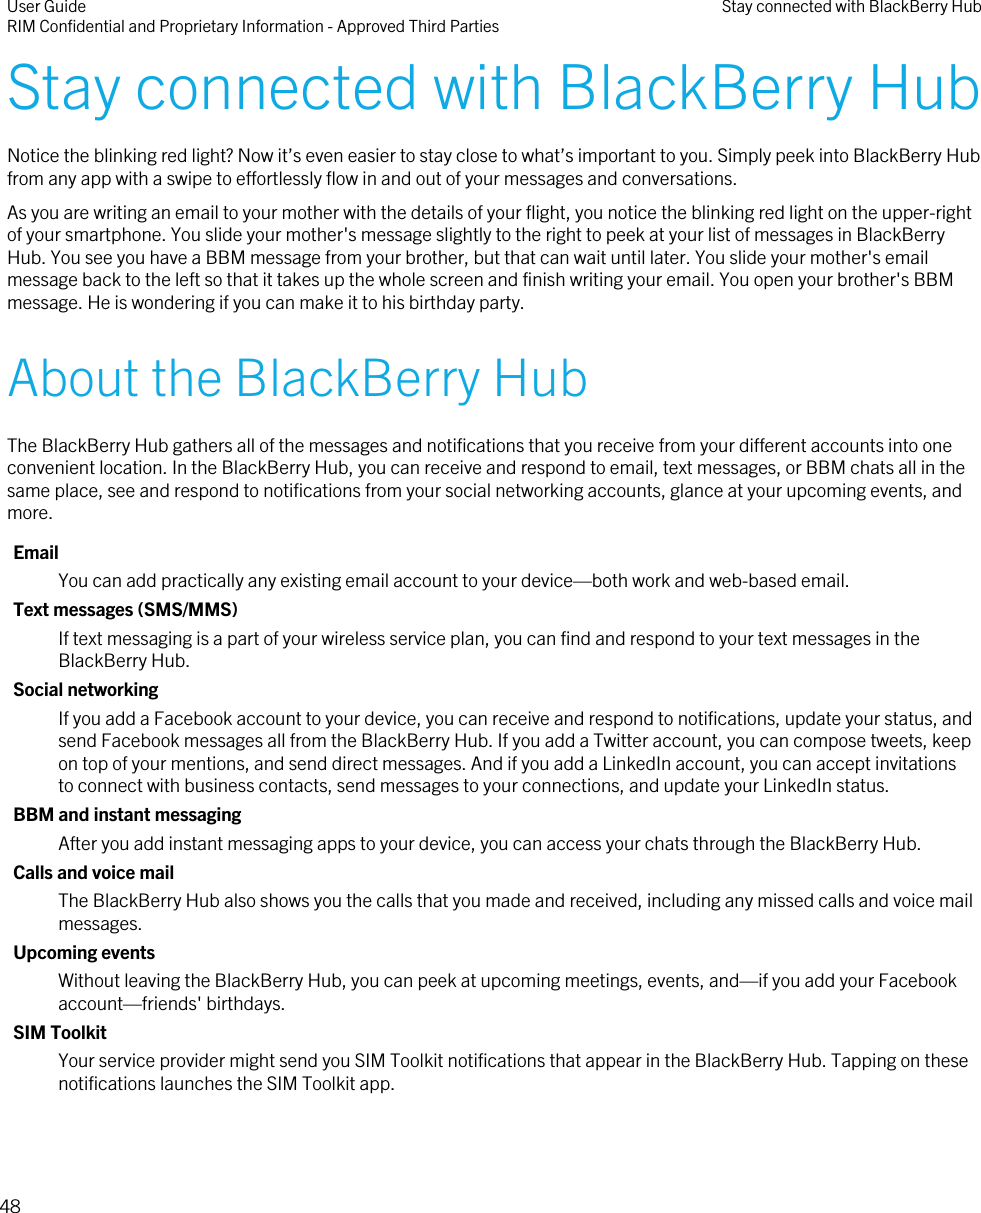 Stay connected with BlackBerry HubNotice the blinking red light? Now it’s even easier to stay close to what’s important to you. Simply peek into BlackBerry Hubfrom any app with a swipe to effortlessly flow in and out of your messages and conversations.As you are writing an email to your mother with the details of your flight, you notice the blinking red light on the upper-rightof your smartphone. You slide your mother&apos;s message slightly to the right to peek at your list of messages in BlackBerryHub. You see you have a BBM message from your brother, but that can wait until later. You slide your mother&apos;s emailmessage back to the left so that it takes up the whole screen and finish writing your email. You open your brother&apos;s BBMmessage. He is wondering if you can make it to his birthday party.About the BlackBerry HubThe BlackBerry Hub gathers all of the messages and notifications that you receive from your different accounts into oneconvenient location. In the BlackBerry Hub, you can receive and respond to email, text messages, or BBM chats all in thesame place, see and respond to notifications from your social networking accounts, glance at your upcoming events, andmore.EmailYou can add practically any existing email account to your device—both work and web-based email.Text messages (SMS/MMS)If text messaging is a part of your wireless service plan, you can find and respond to your text messages in theBlackBerry Hub.Social networkingIf you add a Facebook account to your device, you can receive and respond to notifications, update your status, andsend Facebook messages all from the BlackBerry Hub. If you add a Twitter account, you can compose tweets, keepon top of your mentions, and send direct messages. And if you add a LinkedIn account, you can accept invitationsto connect with business contacts, send messages to your connections, and update your LinkedIn status.BBM and instant messagingAfter you add instant messaging apps to your device, you can access your chats through the BlackBerry Hub.Calls and voice mailThe BlackBerry Hub also shows you the calls that you made and received, including any missed calls and voice mailmessages.Upcoming eventsWithout leaving the BlackBerry Hub, you can peek at upcoming meetings, events, and—if you add your Facebookaccount—friends&apos; birthdays.SIM ToolkitYour service provider might send you SIM Toolkit notifications that appear in the BlackBerry Hub. Tapping on thesenotifications launches the SIM Toolkit app.User GuideRIM Confidential and Proprietary Information - Approved Third Parties Stay connected with BlackBerry Hub48